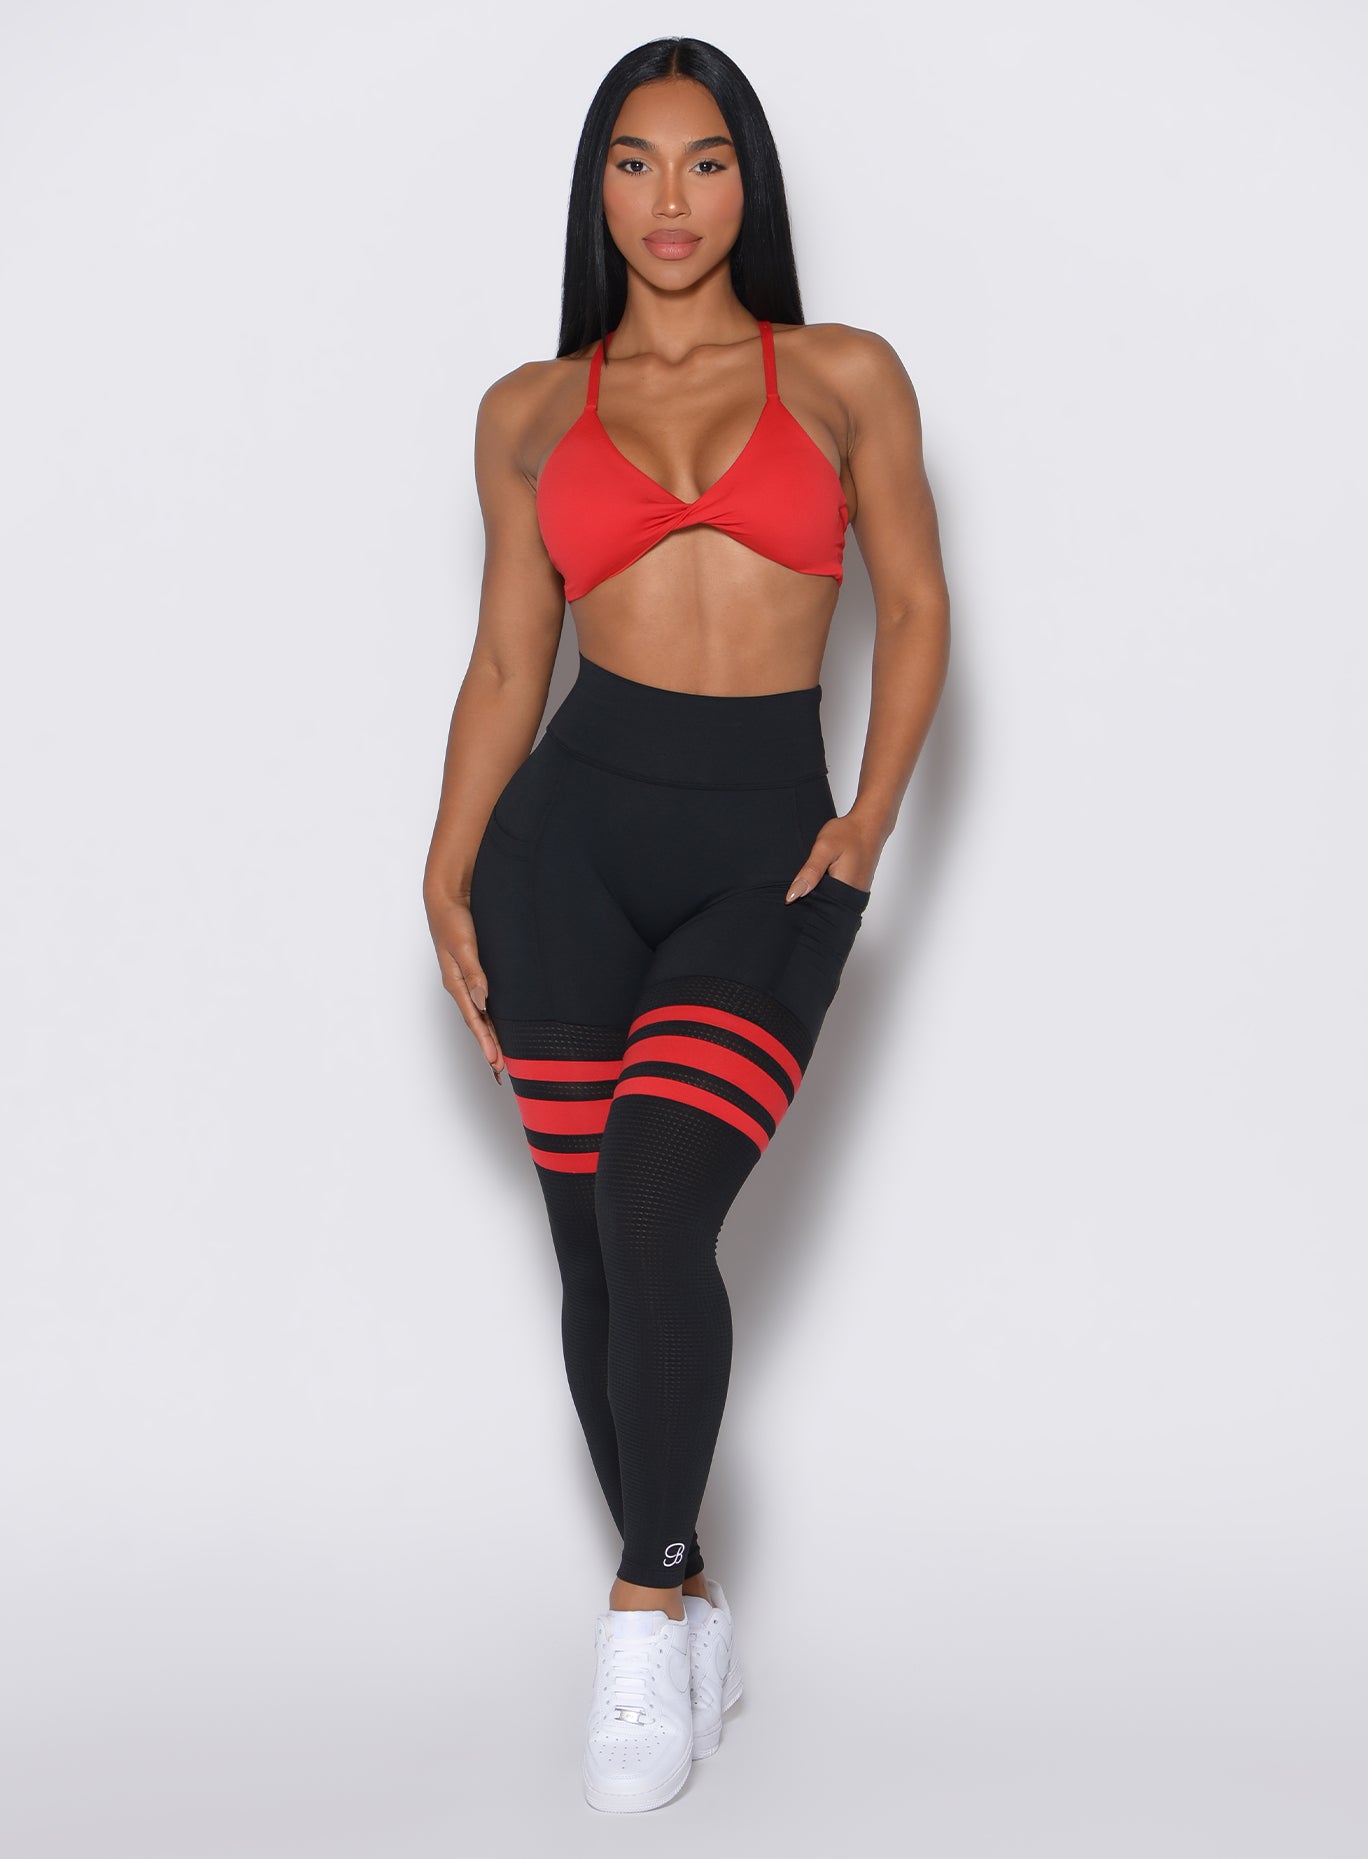 Front profile view of a model wearing the Perform Thigh Highs in Black Fire color along with a matching bra